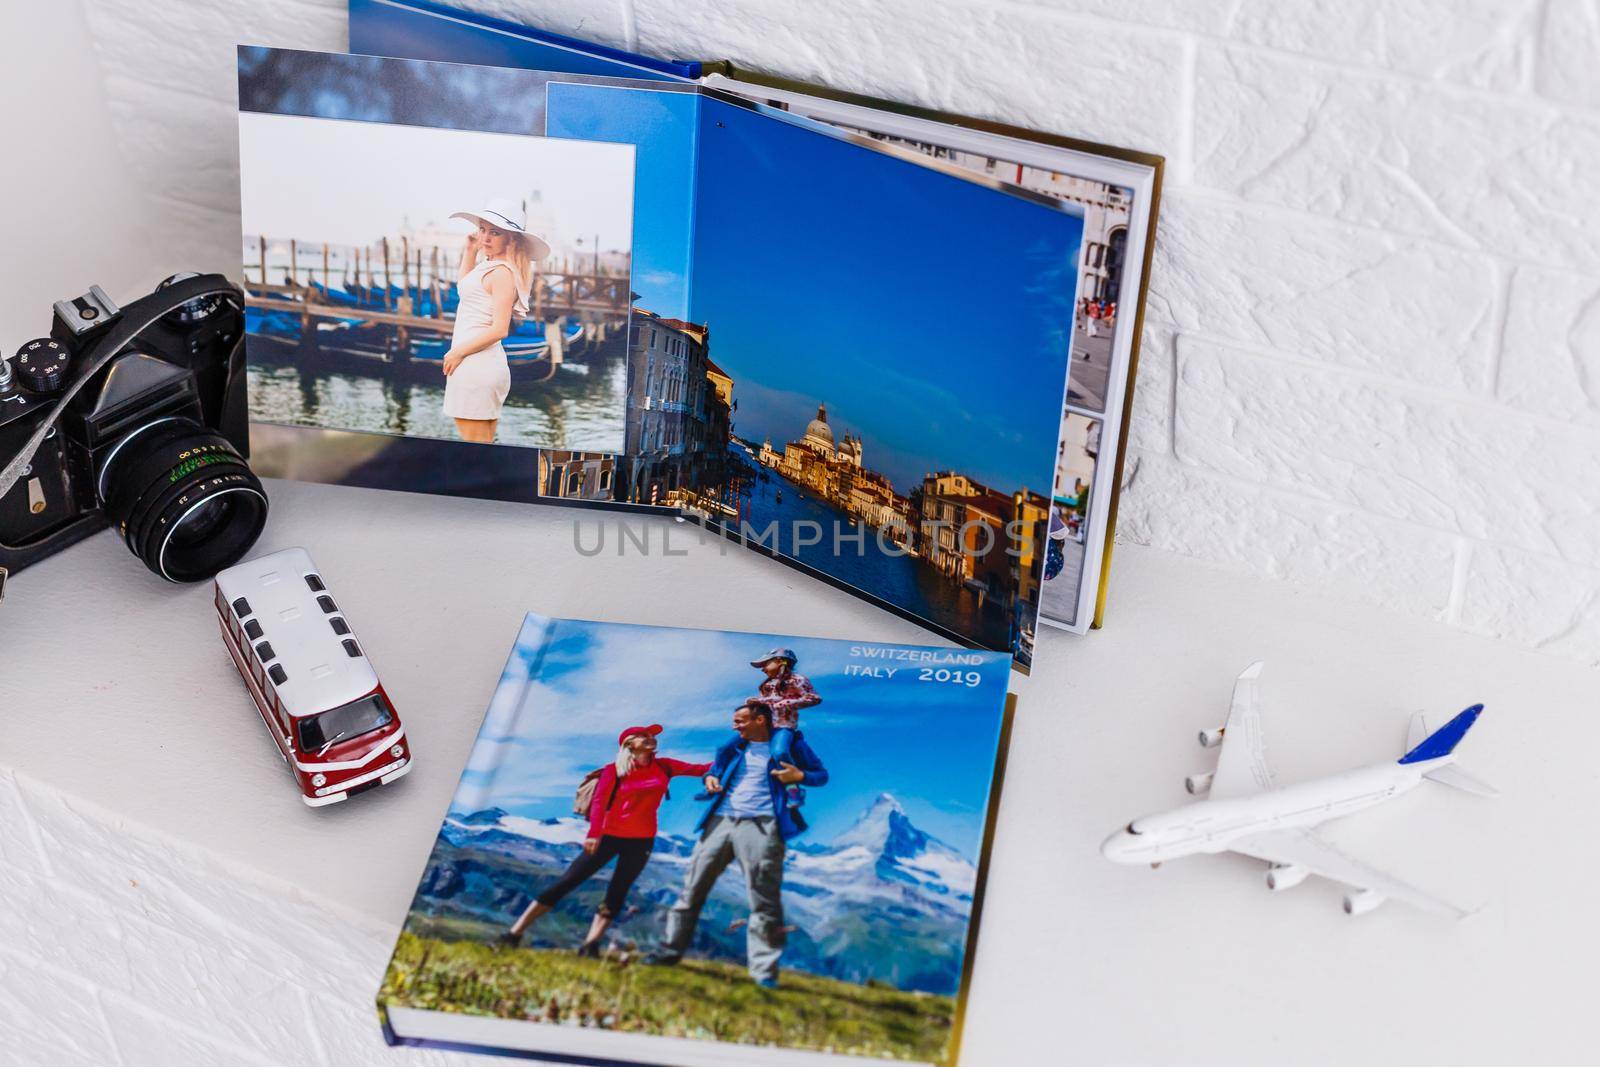 Photobook Album with Travel Photo with toy bus and plane. photo book by Andelov13